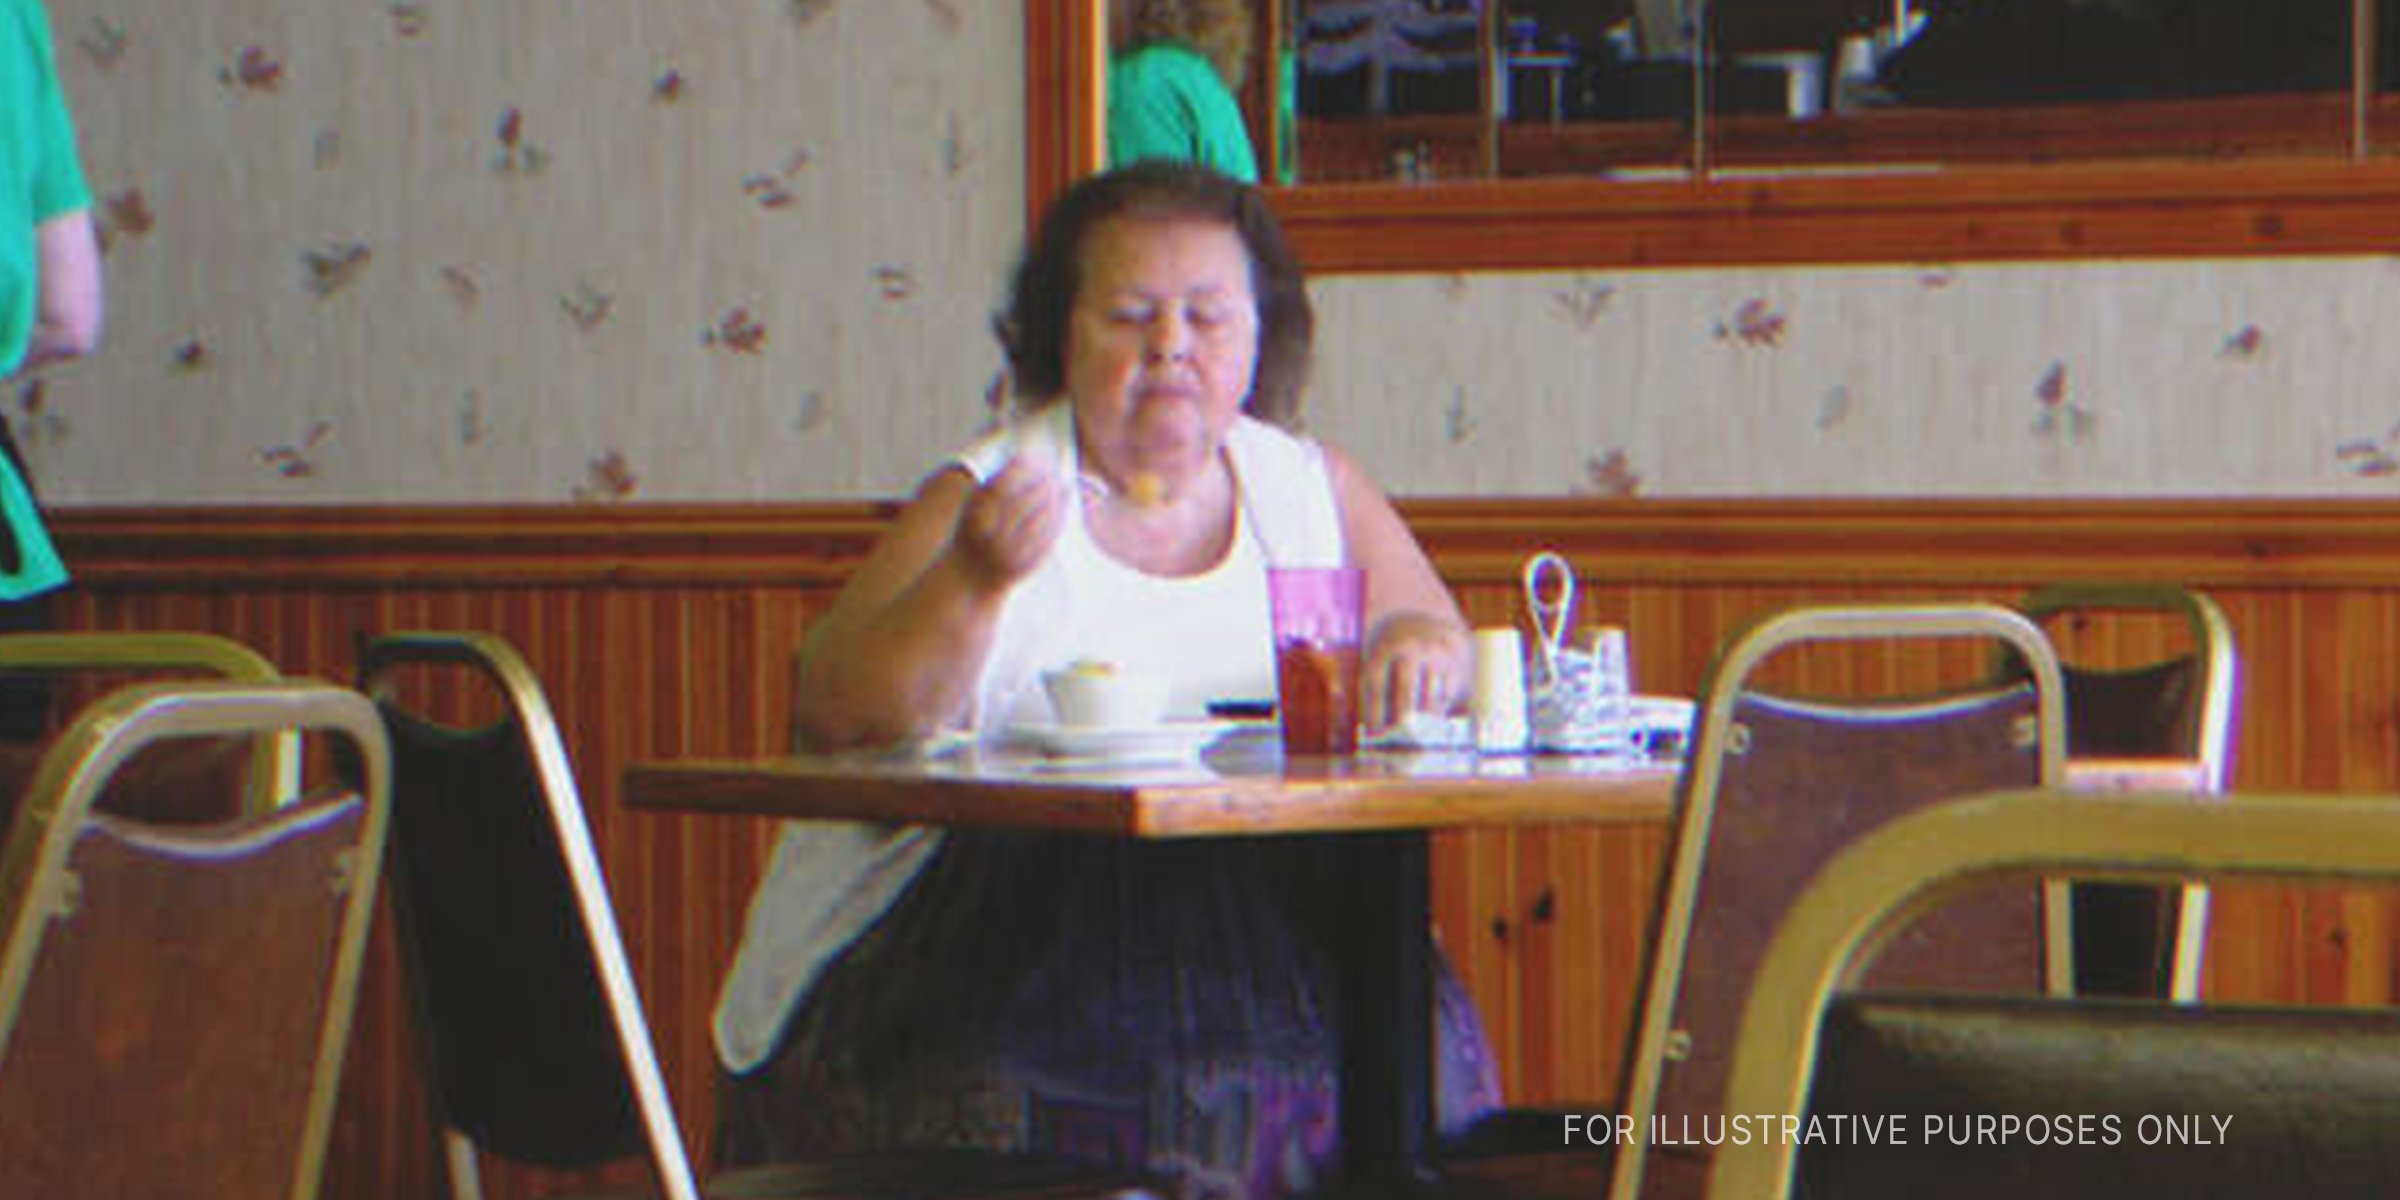 Woman eating in restaurant | Source: Flickr / joguldi (CC BY 2.0)